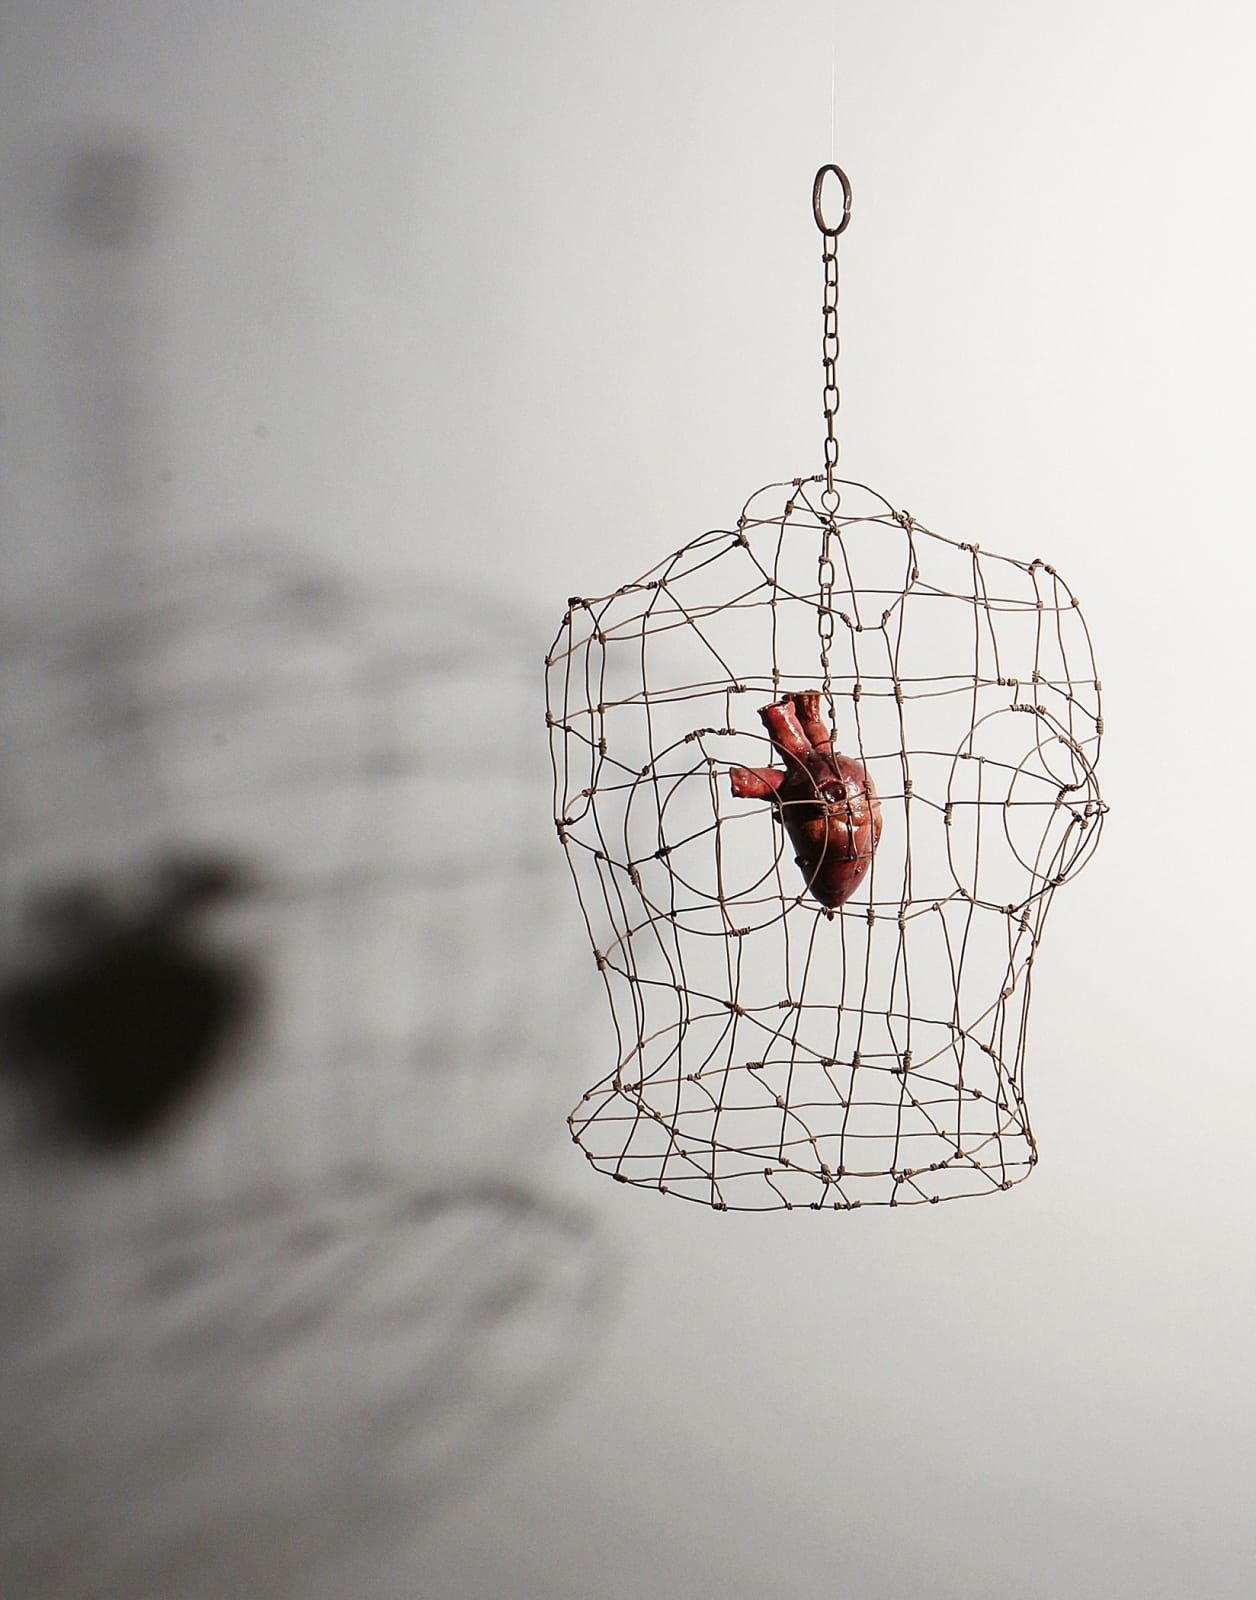 Renée Stout, Armored Heart/Caged Heart, 2005